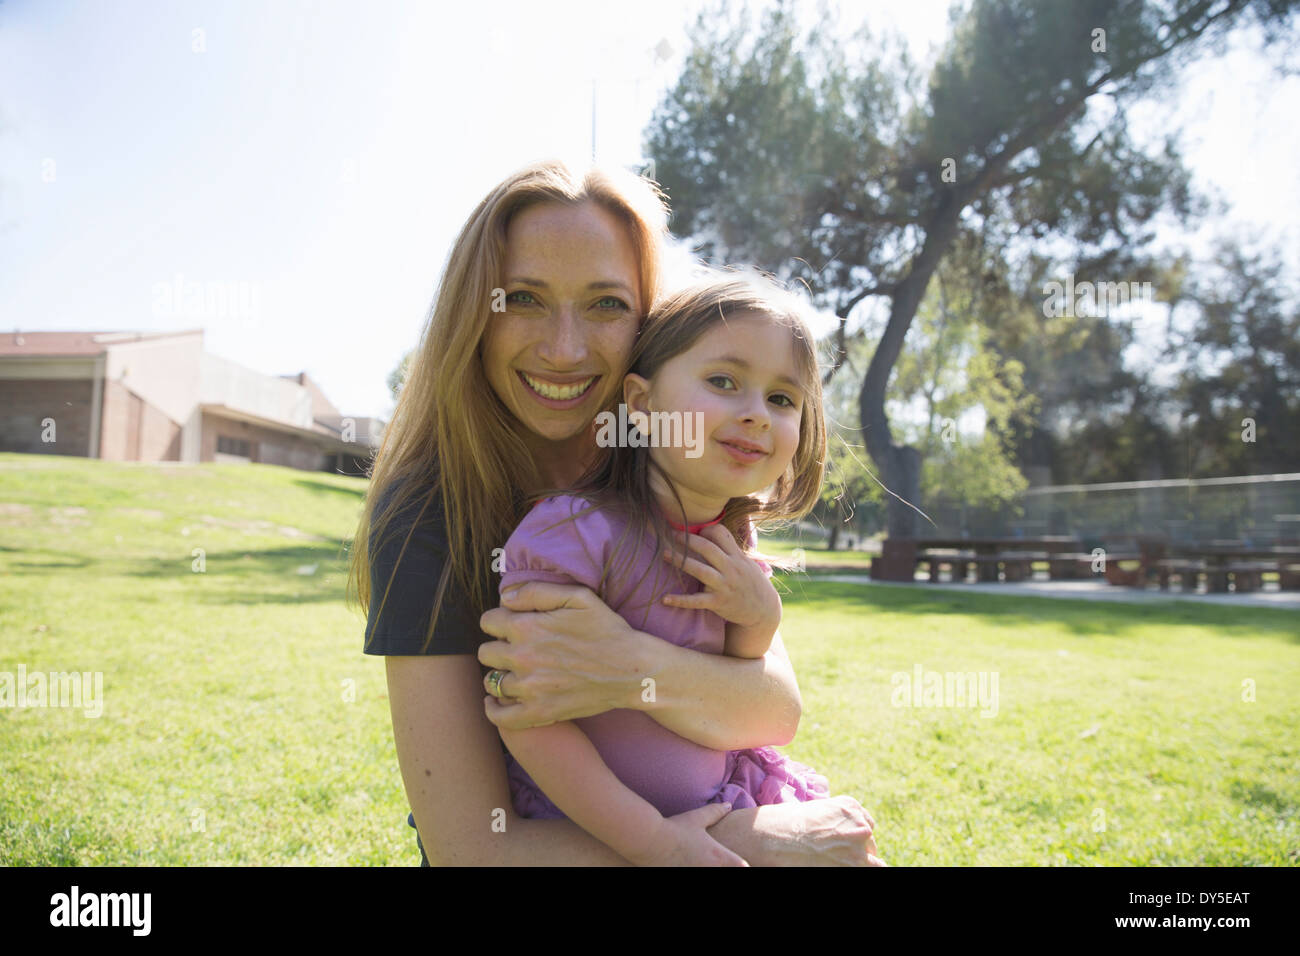 Mother and Daughter in park Banque D'Images